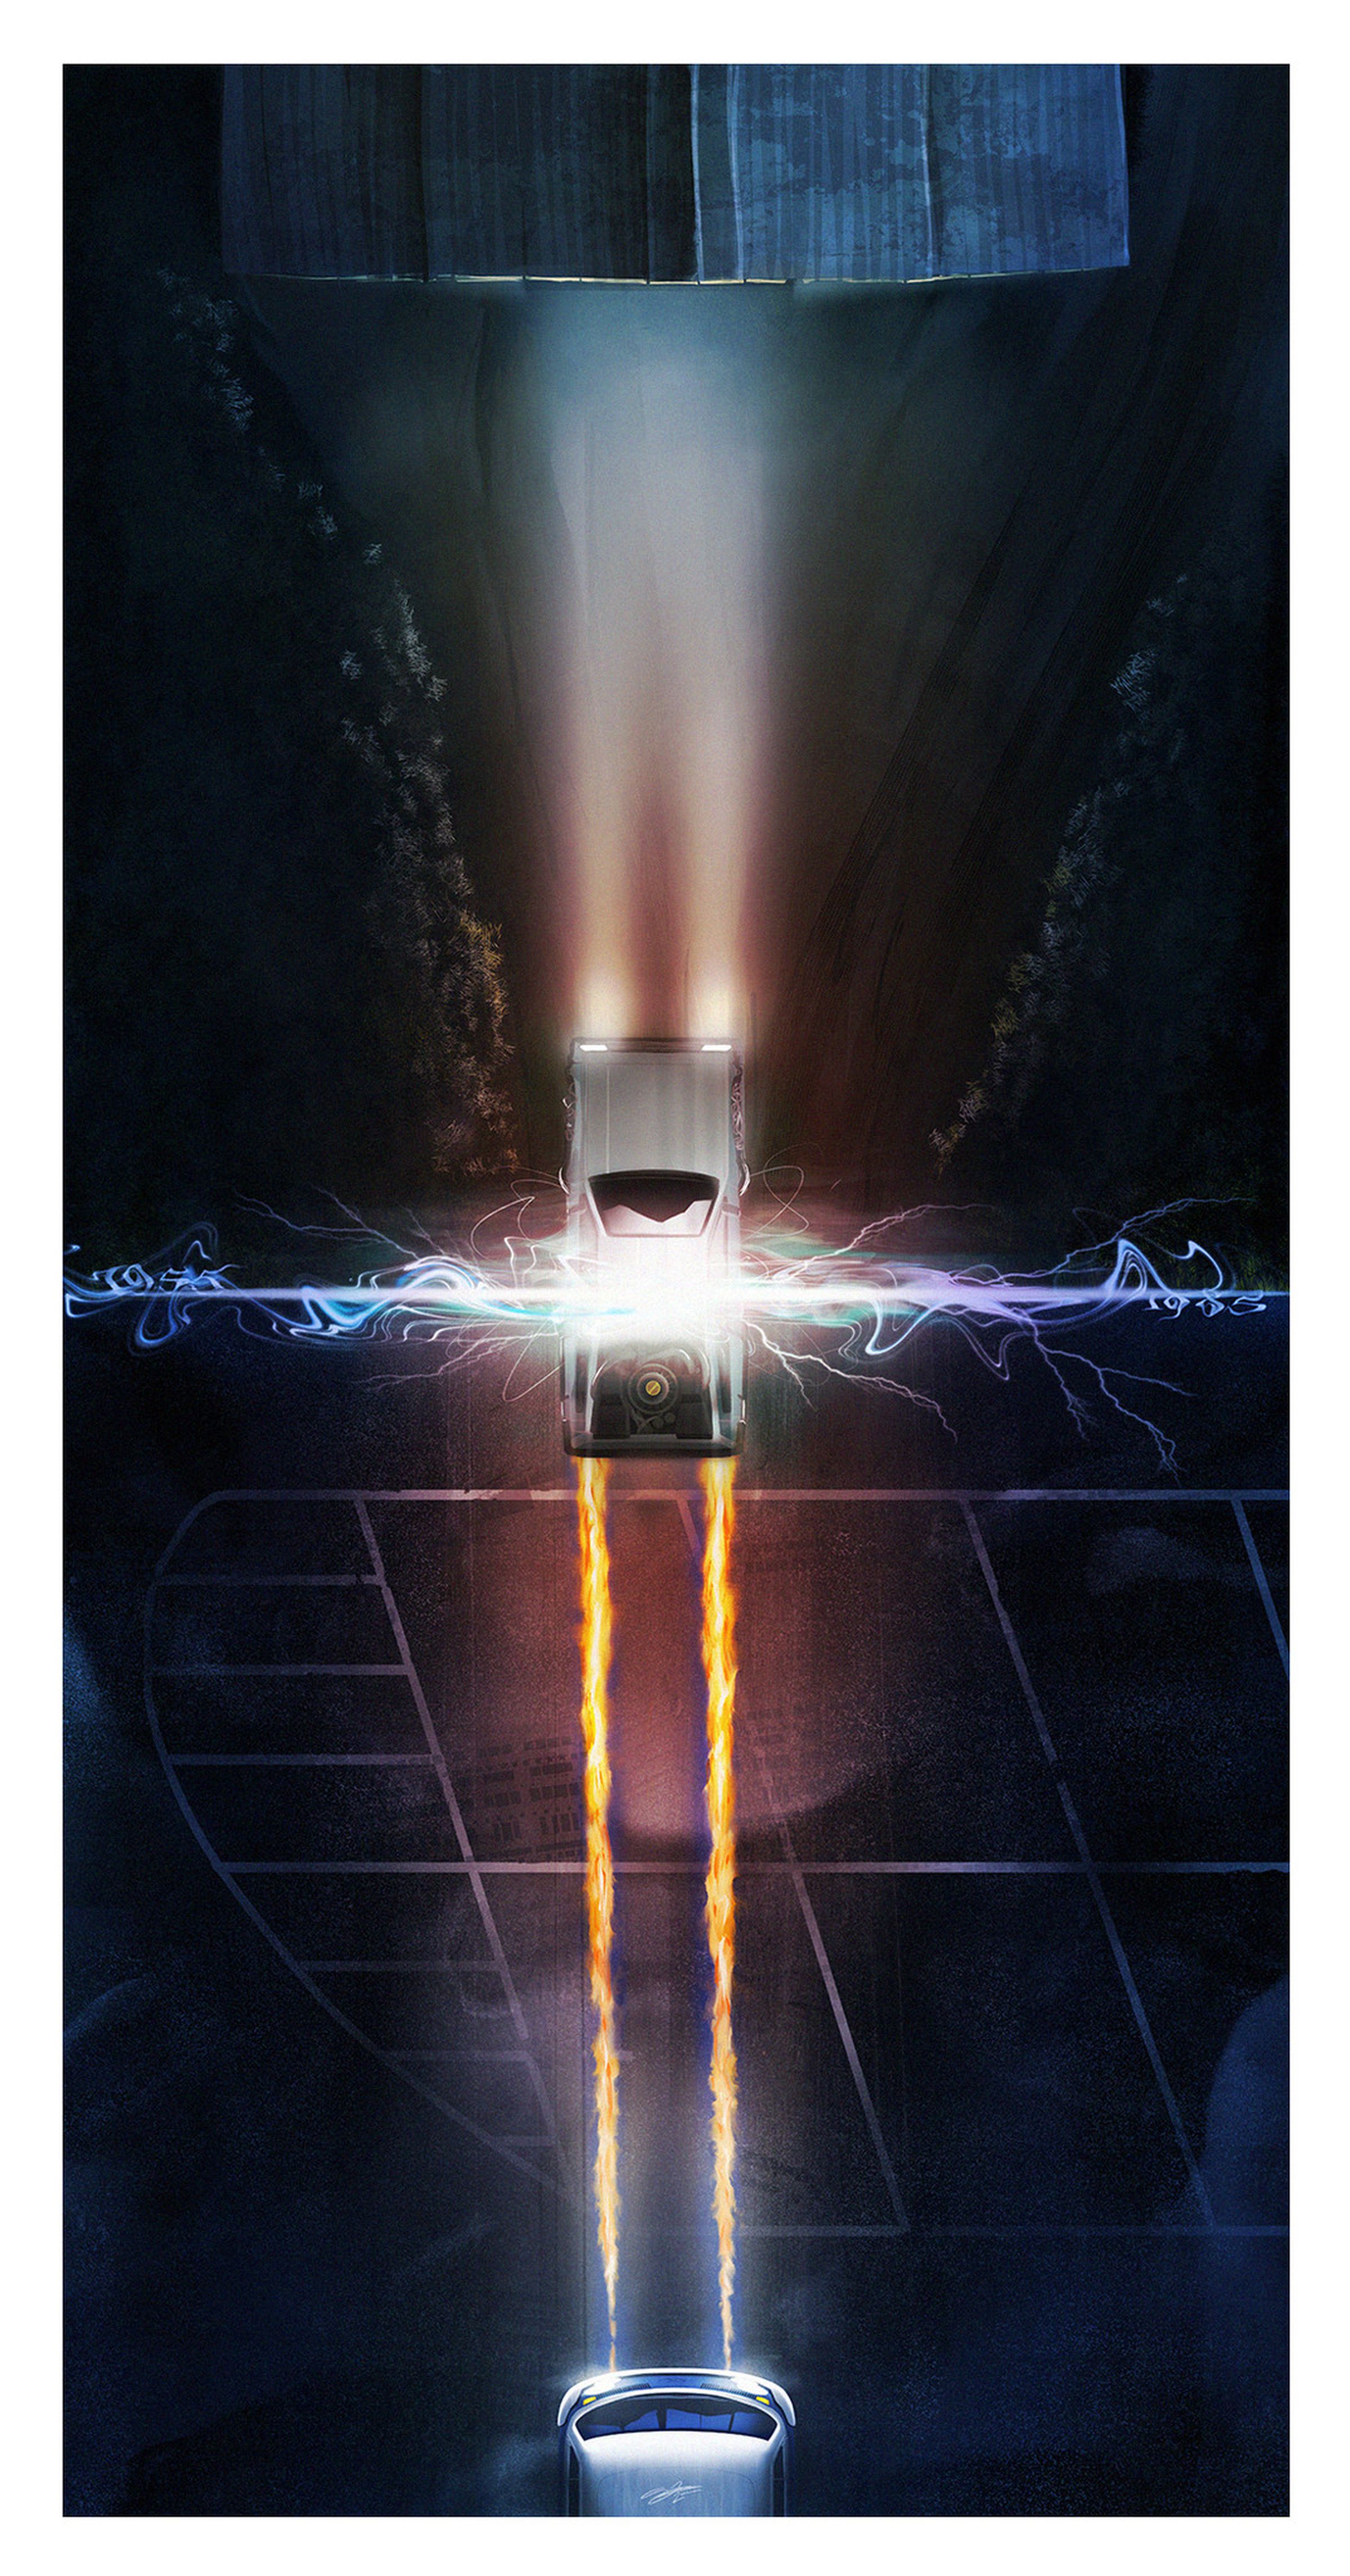 These Back to the Future posters show time travel in an instant